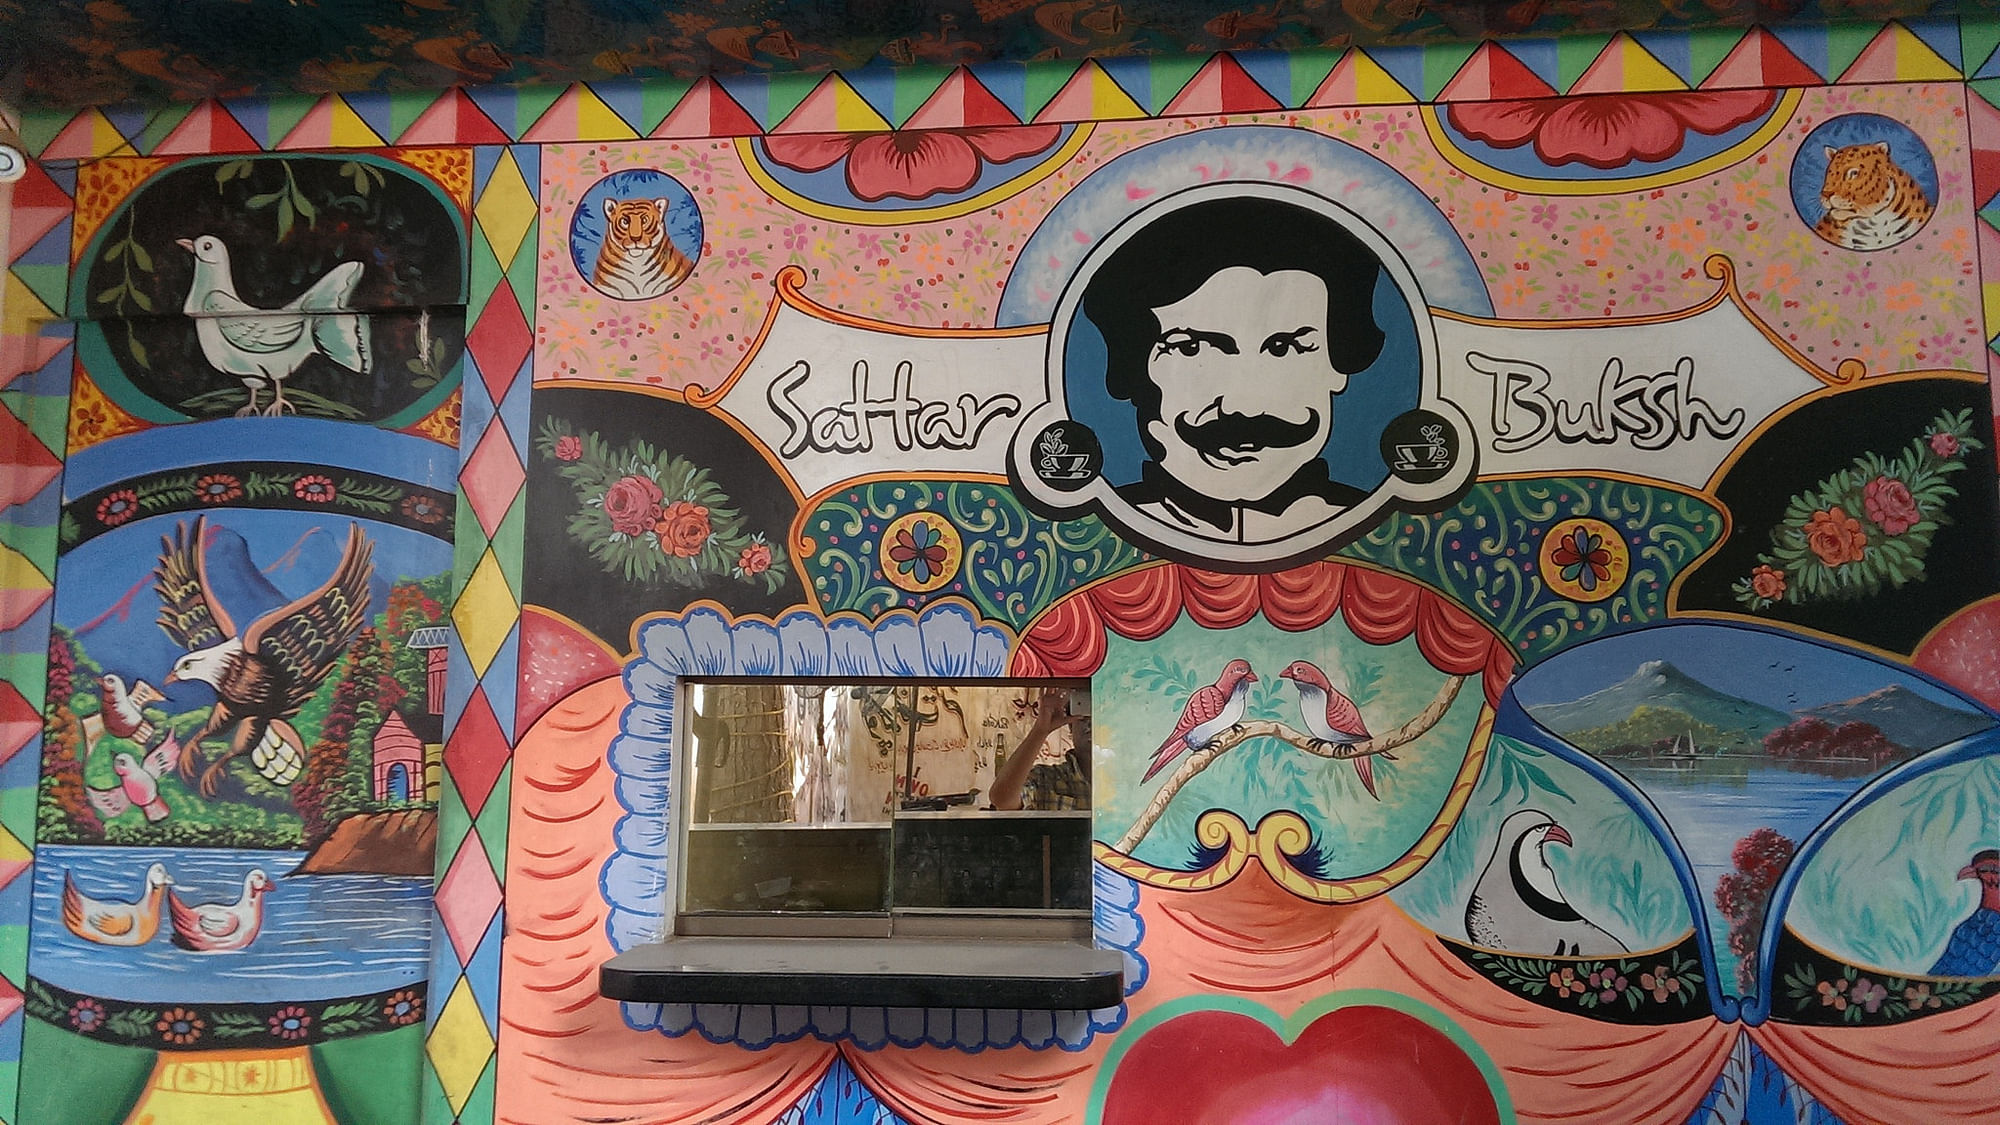 Mural in Karachi. Pakistan multiple identities cannot be reduced to religious fanaticism.&nbsp;